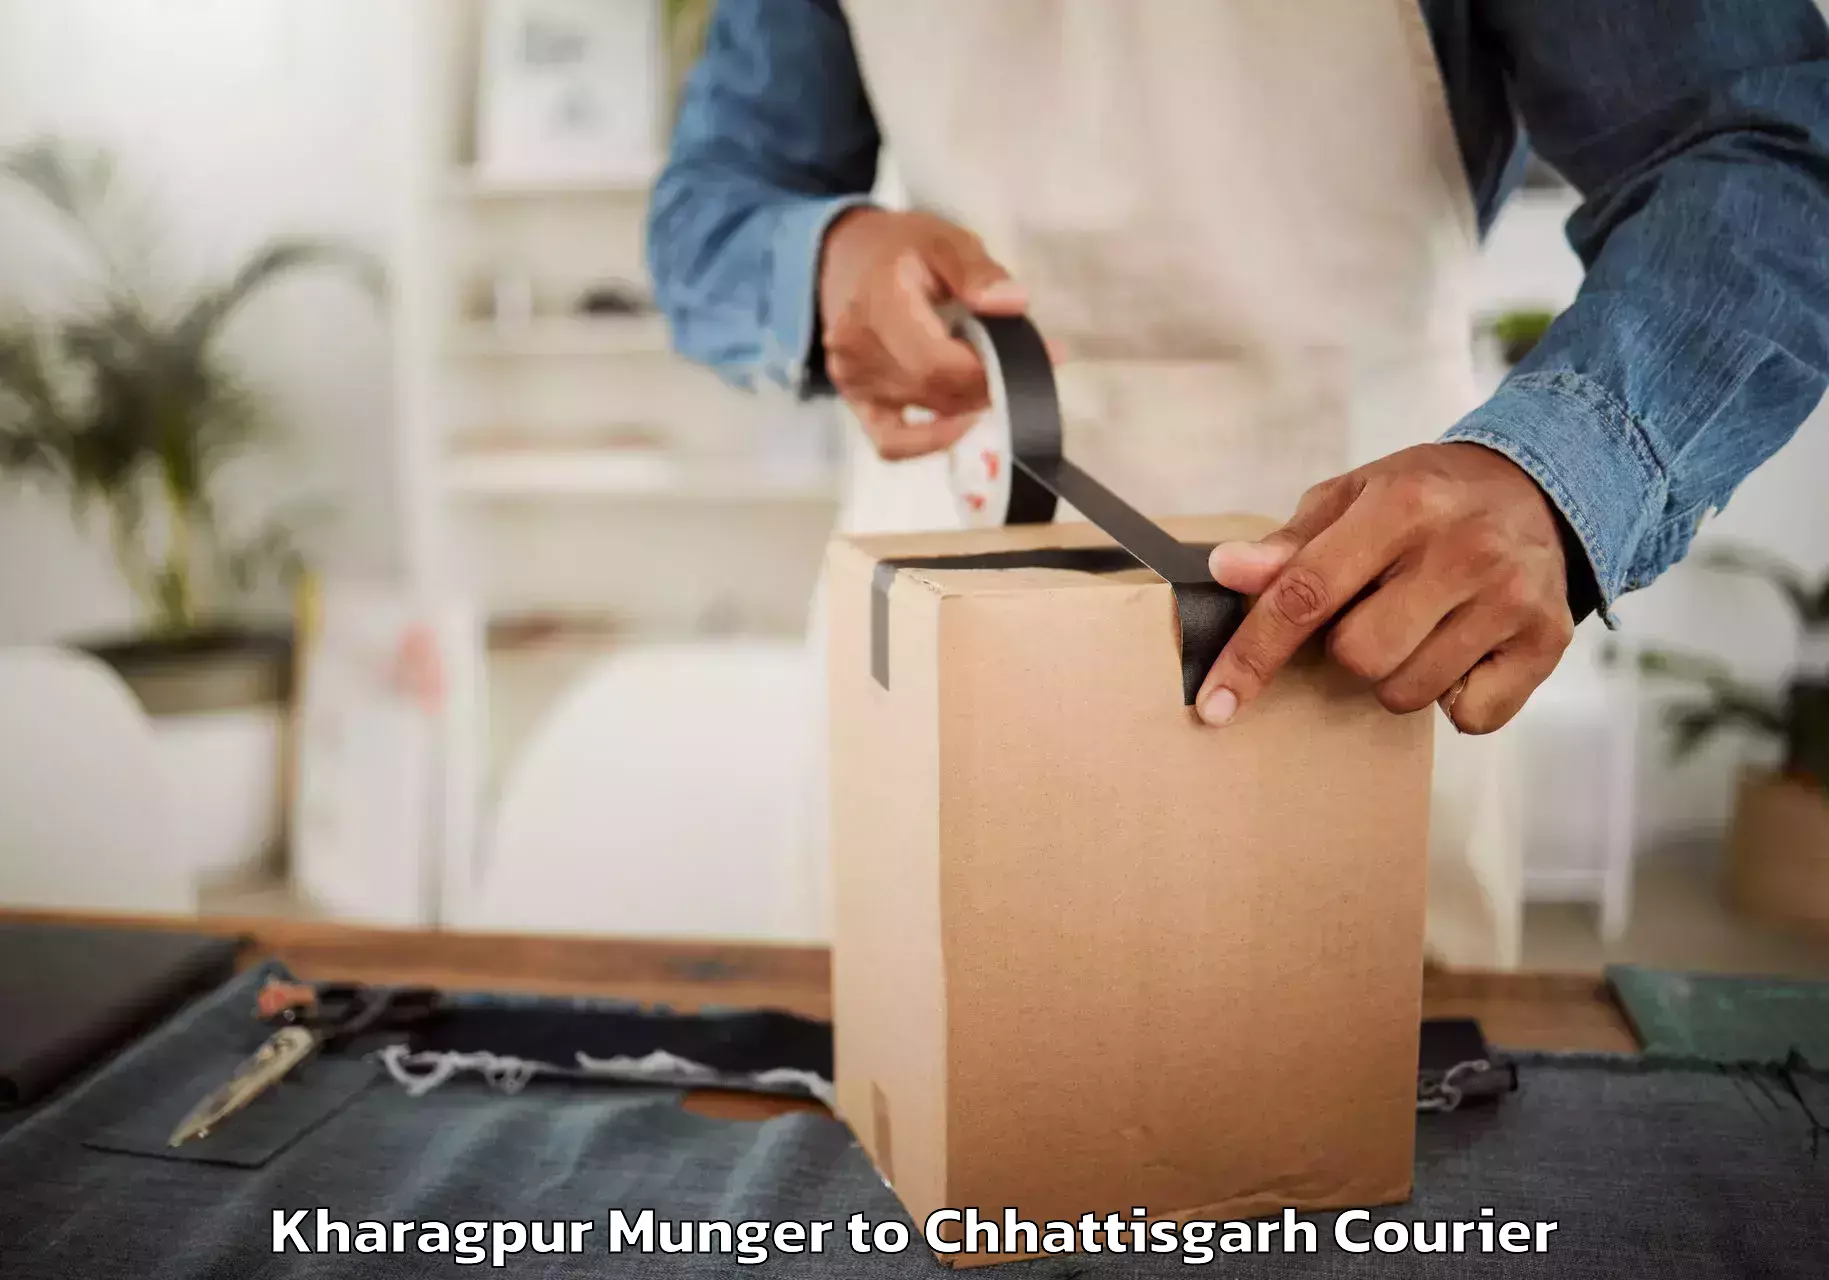 Furniture relocation experts Kharagpur Munger to Abhanpur